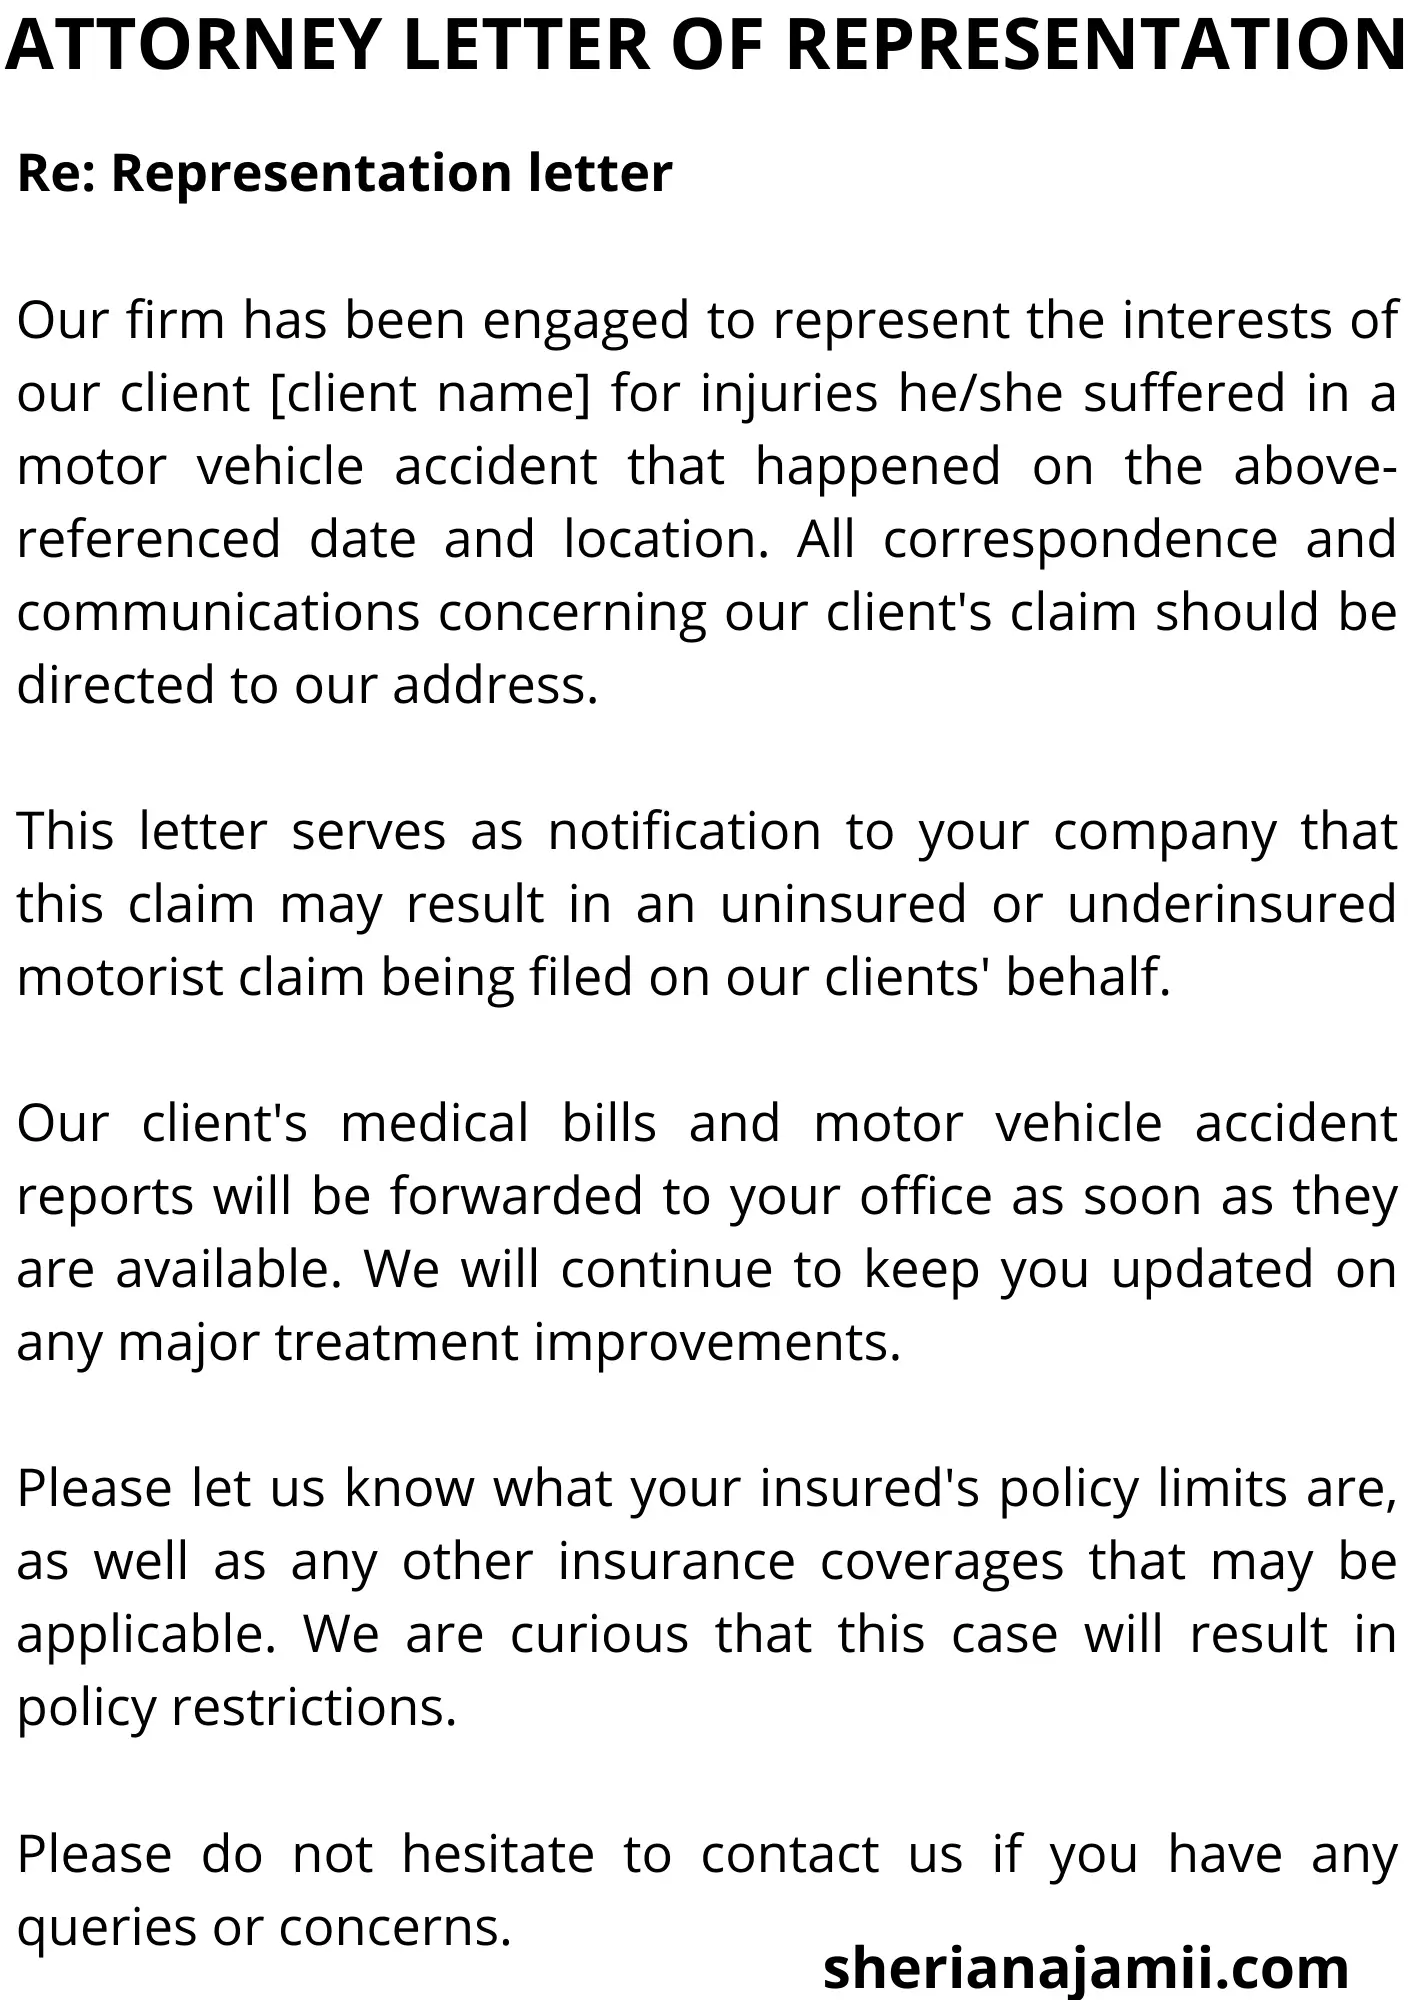 Letter of representation to insurance company